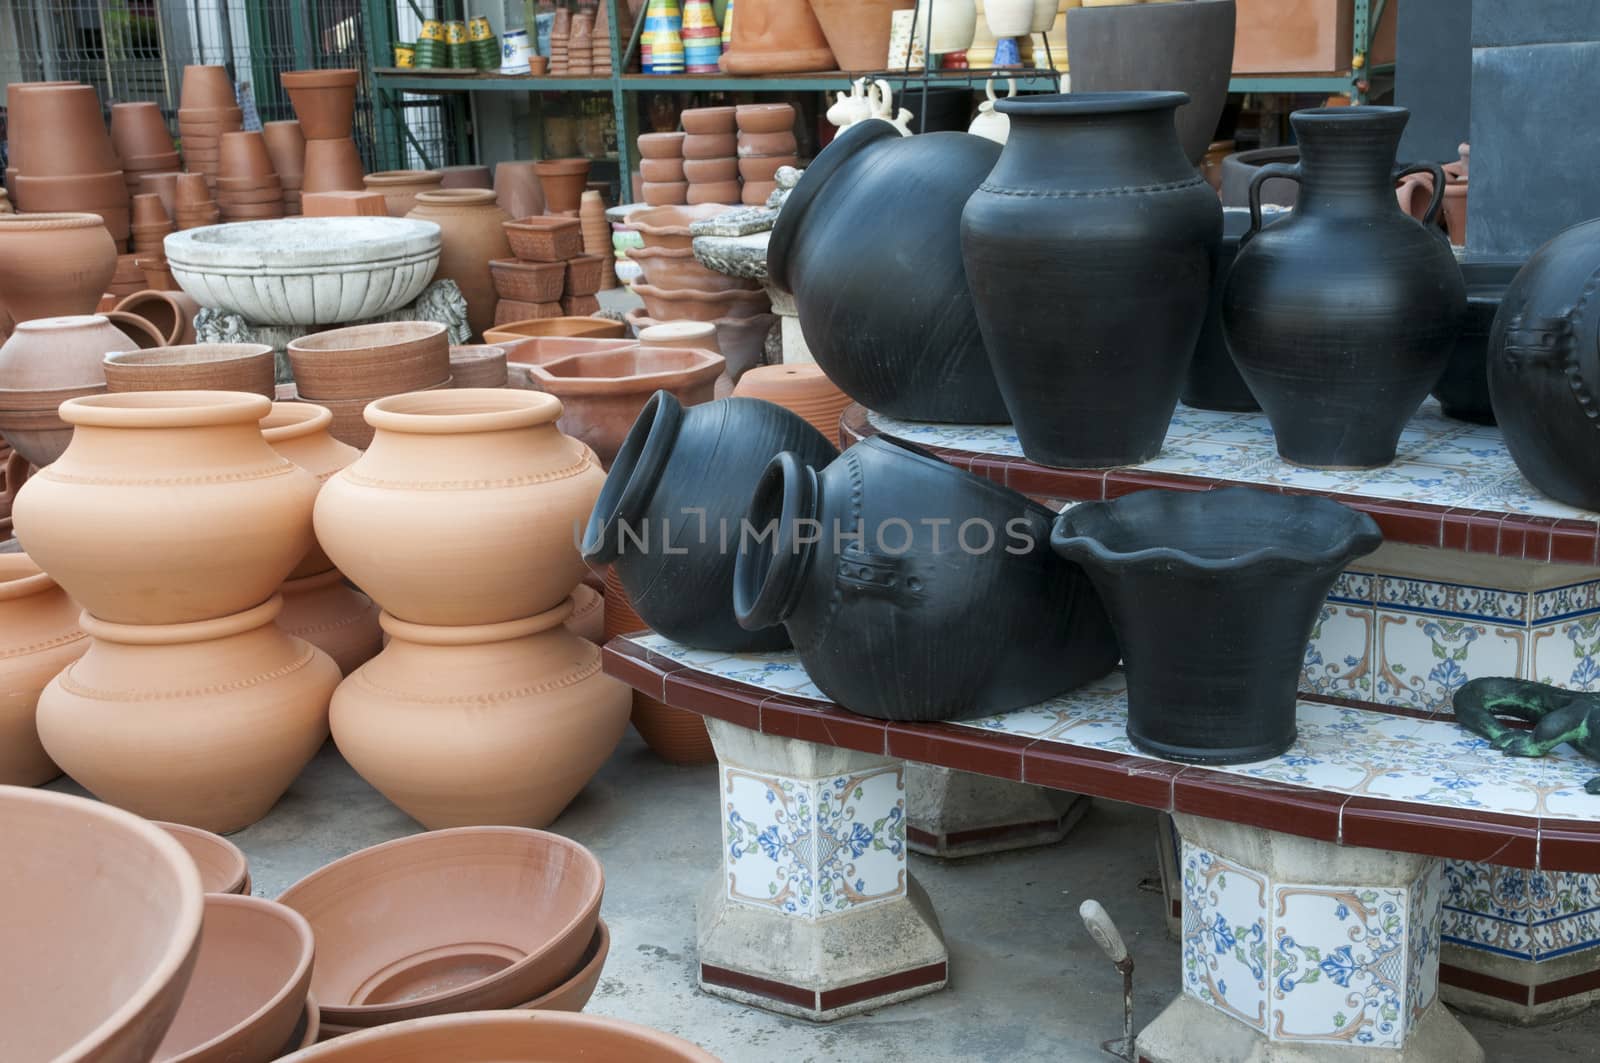 ceramics of various colors and different pieces